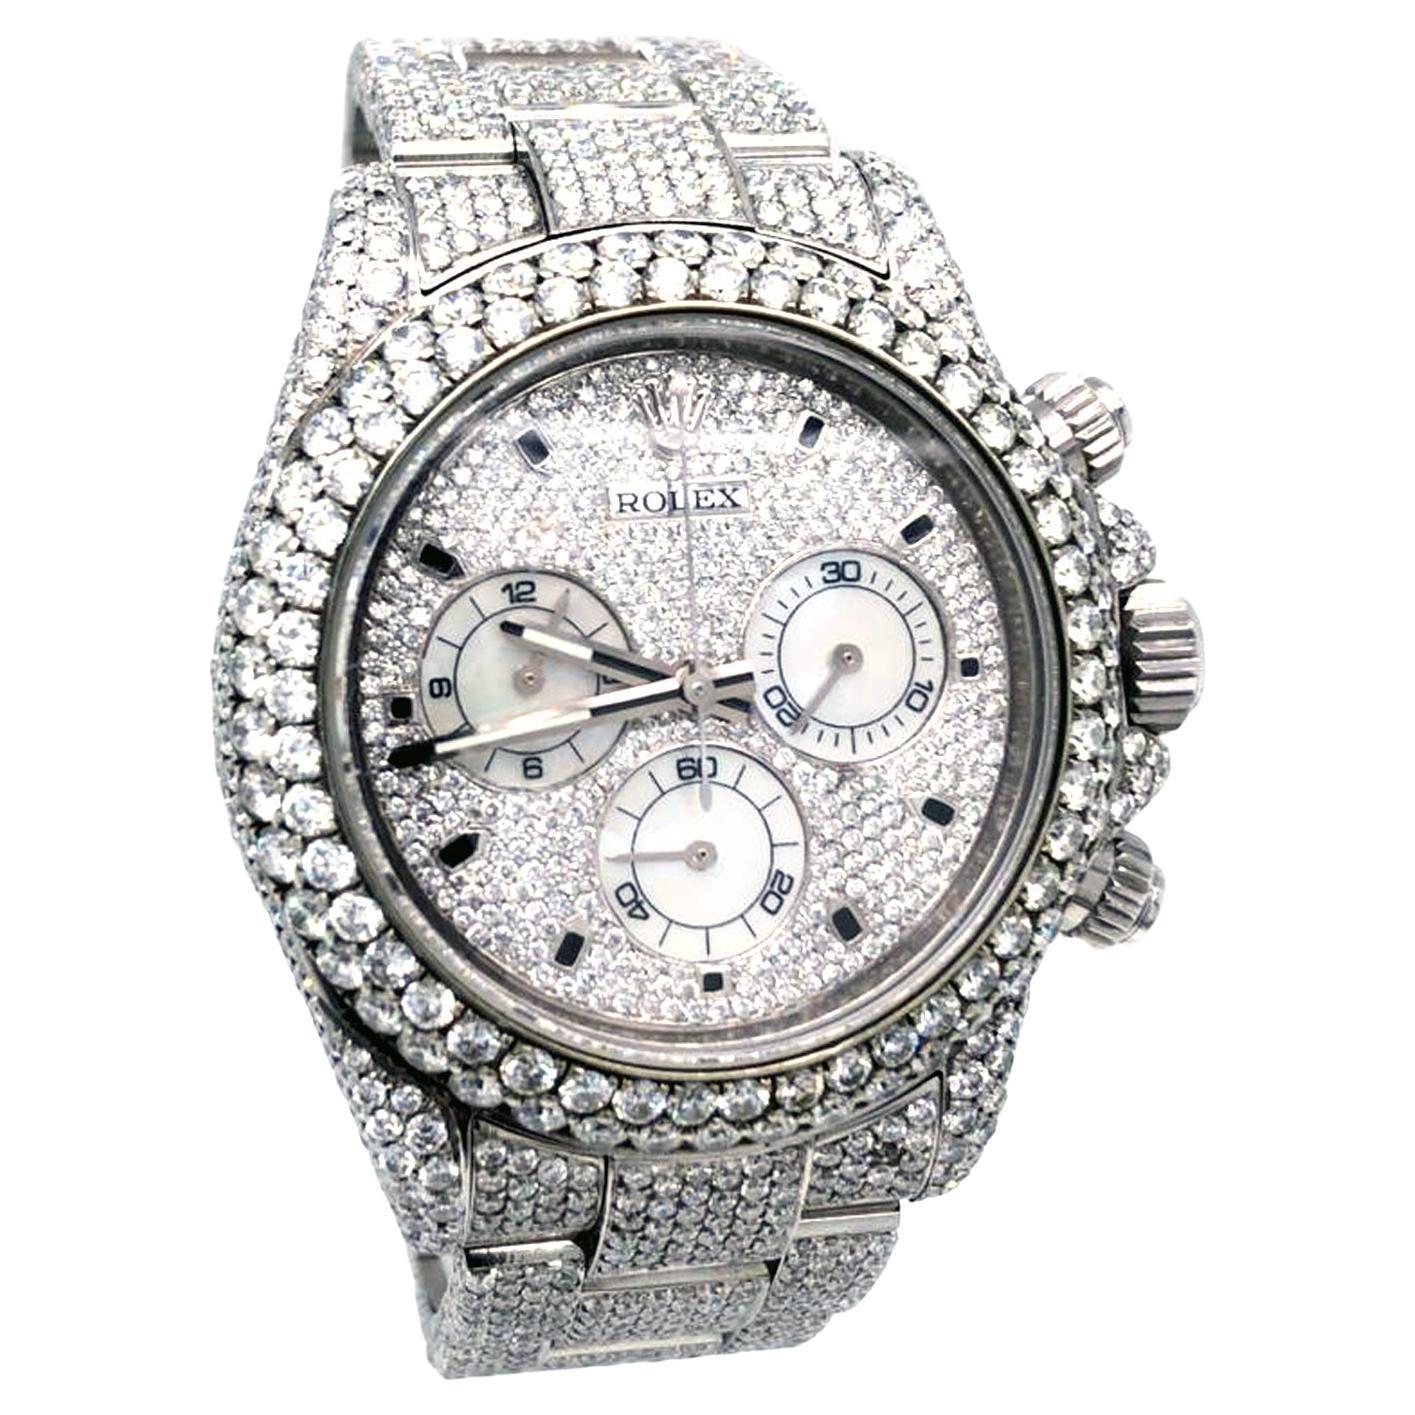 Rolex Daytona Custom Mother of Pearl Diamond Pave Dial Steel Watch 116520 For Sale